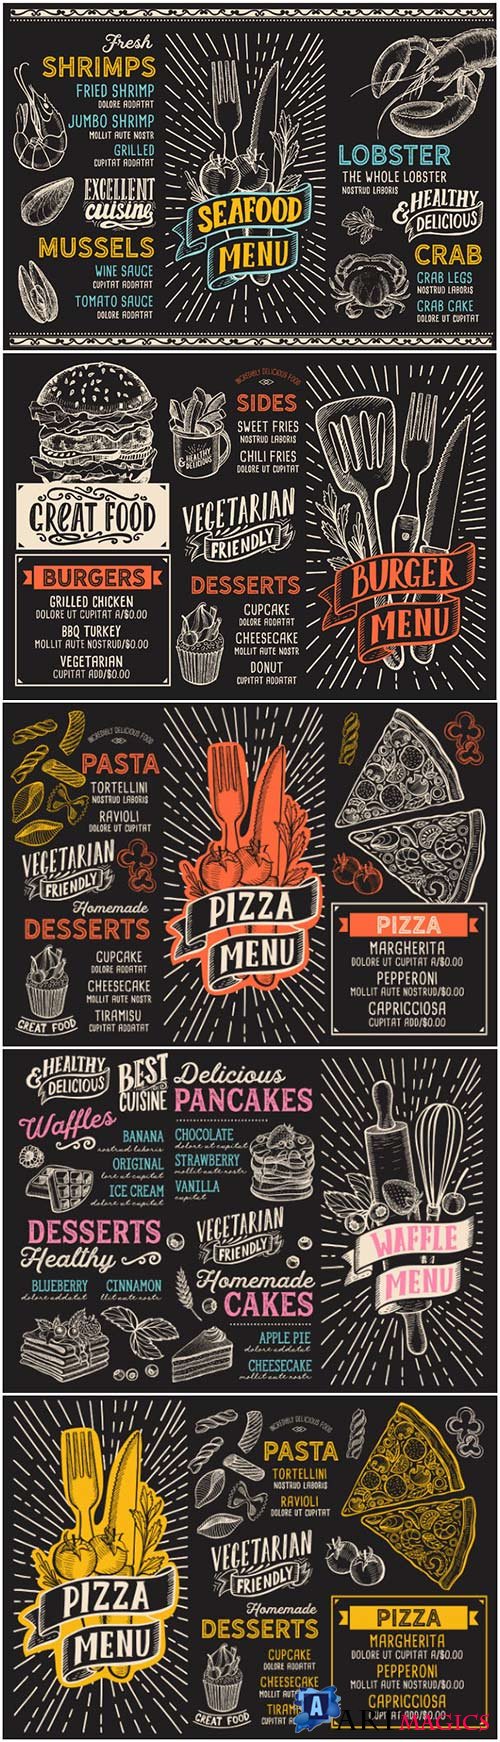 Menu template for restaurant with doodle hand-drawn graphic